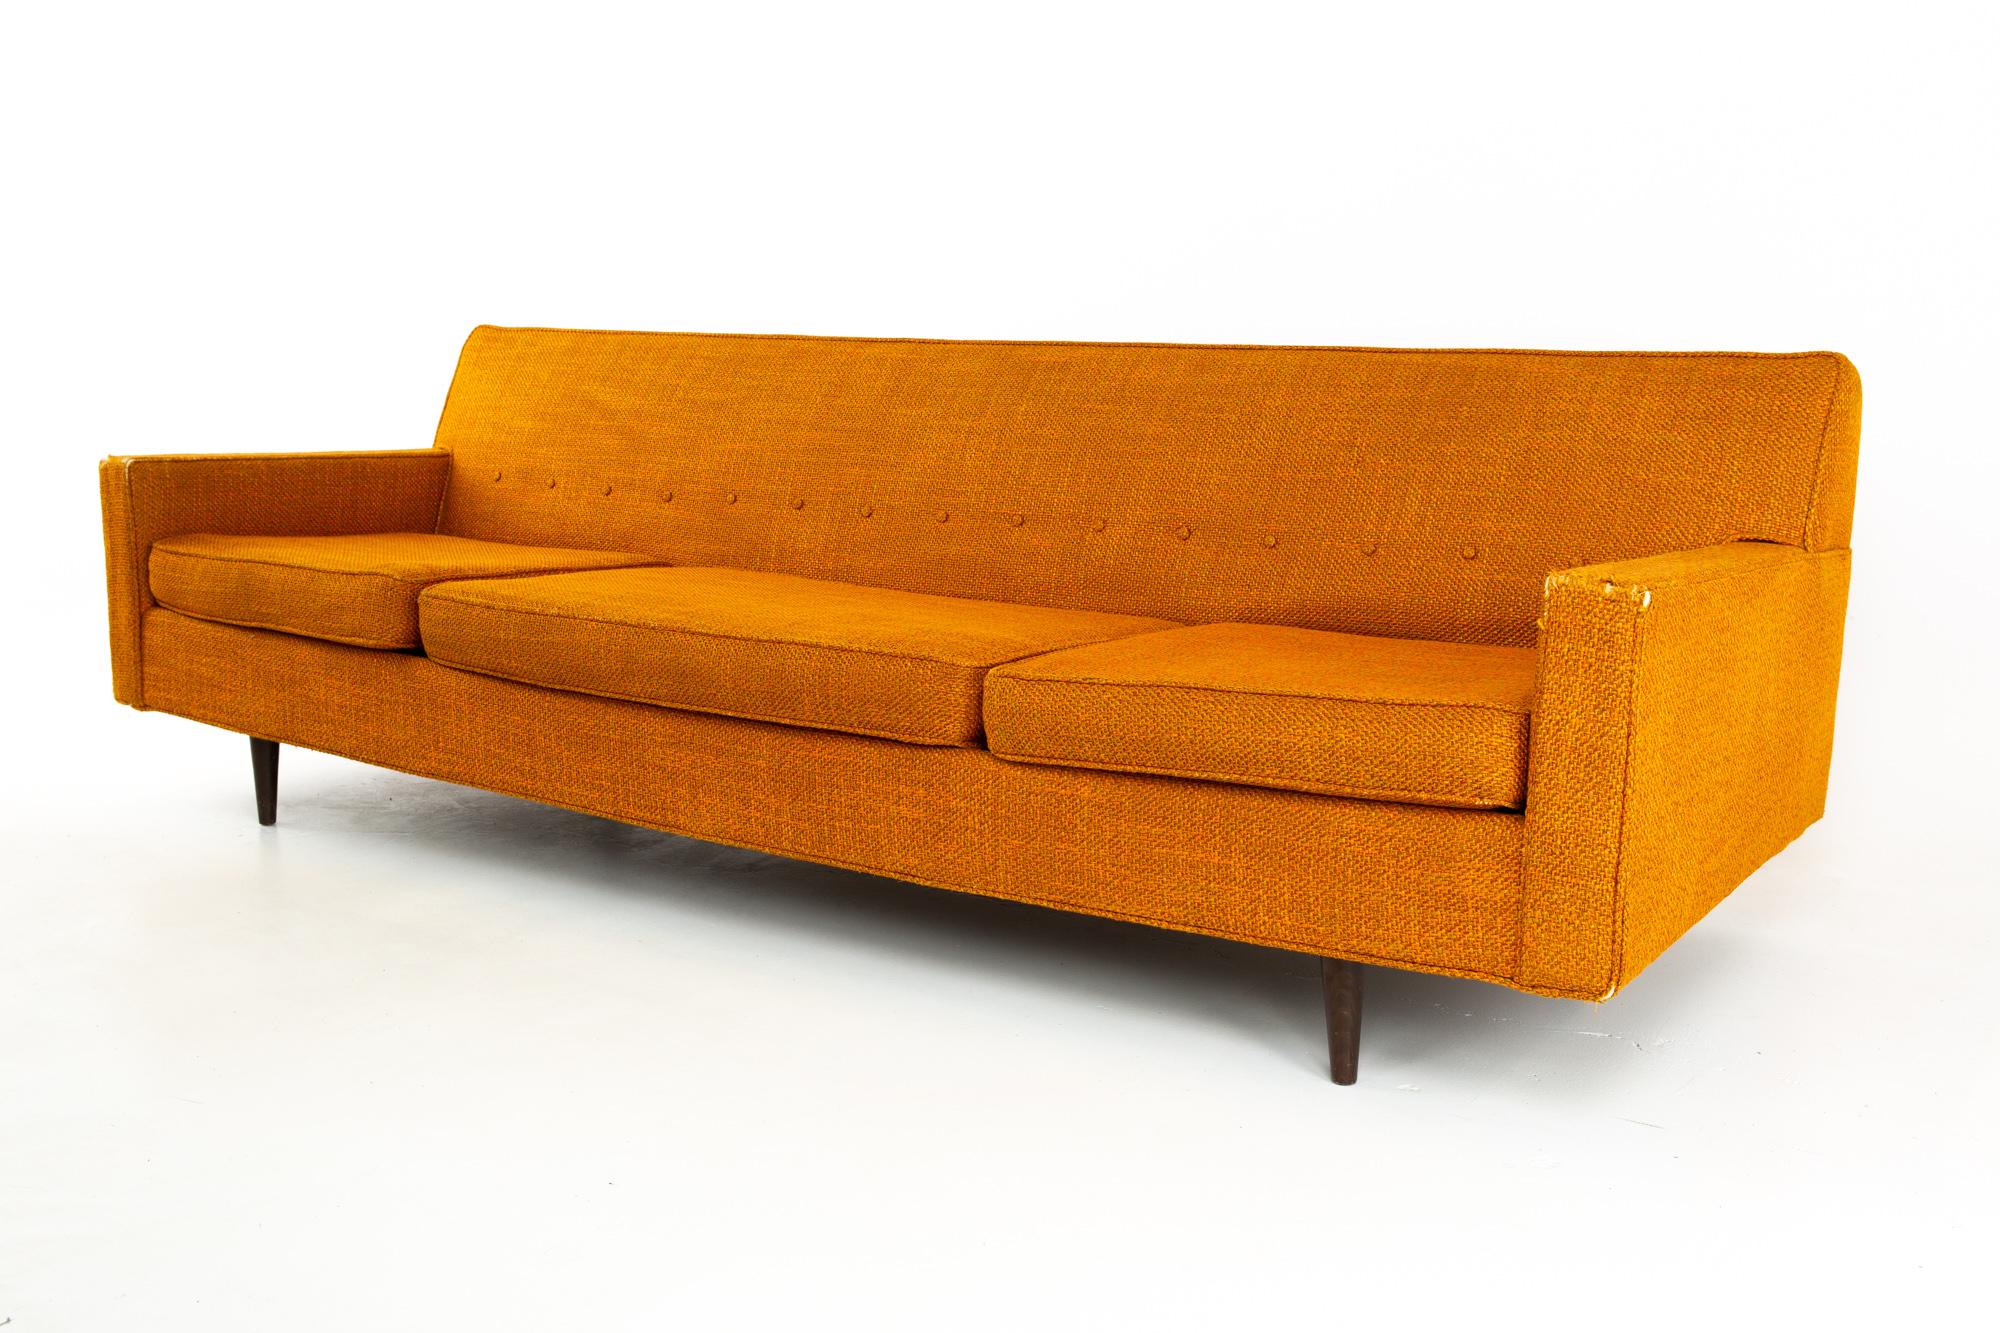 Milo Baughman style Selig mid century sofa
Sofa measures: 91.5 wide x 32.75 deep x 28 high, with a seat height of 15.5 inches 
Ready for new upholstery

All pieces of furniture can be had in what we call restored vintage condition. That means